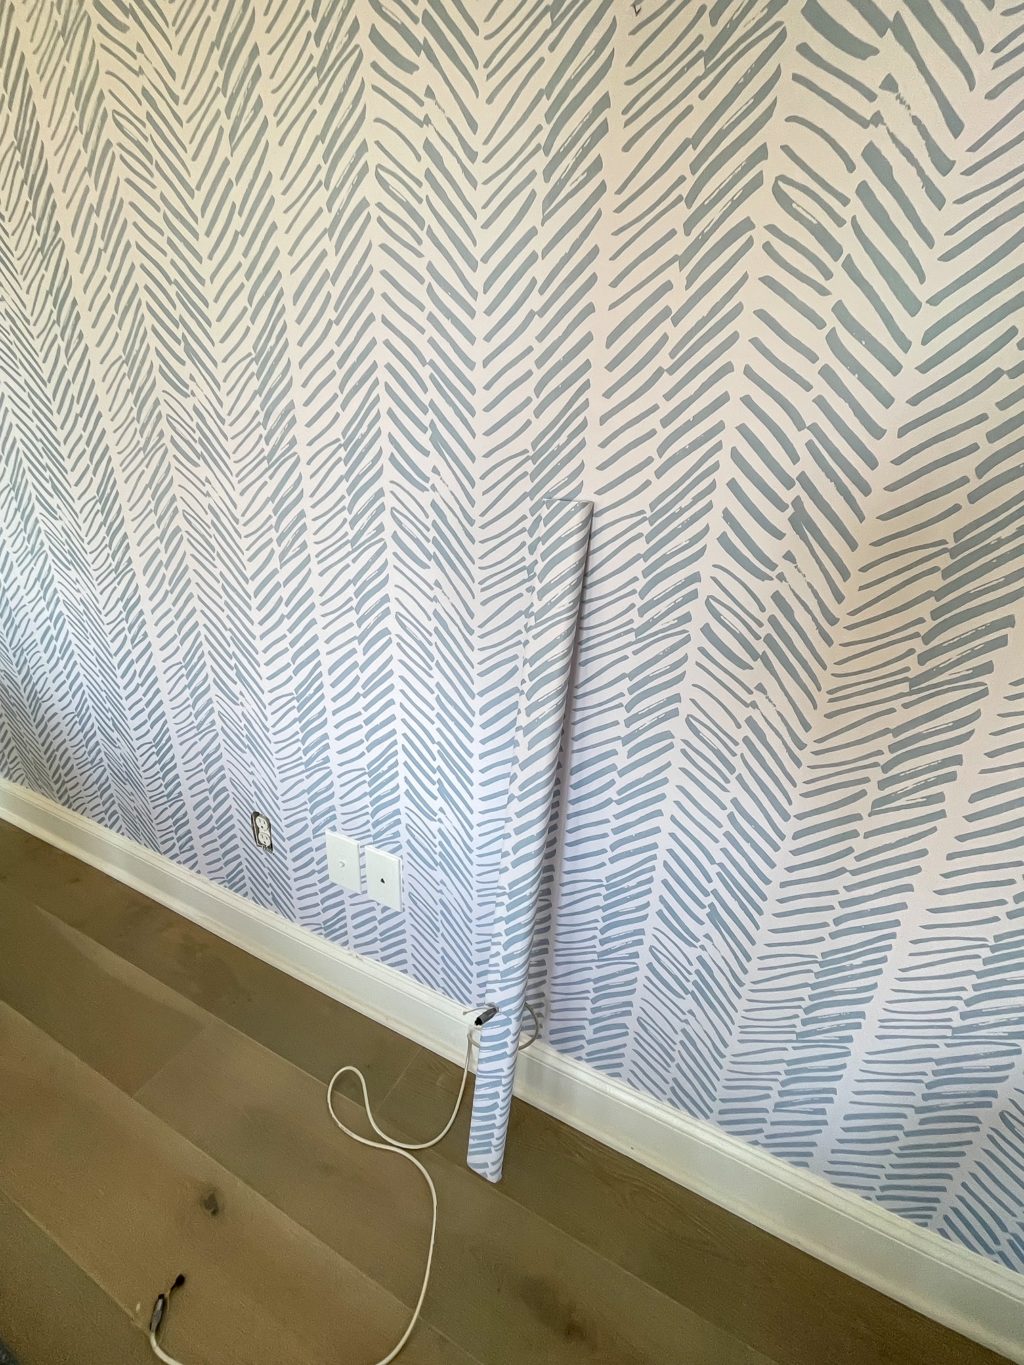 Creative Solution for The Wall Cord Cover - Duke Manor Farm by Laura Janning